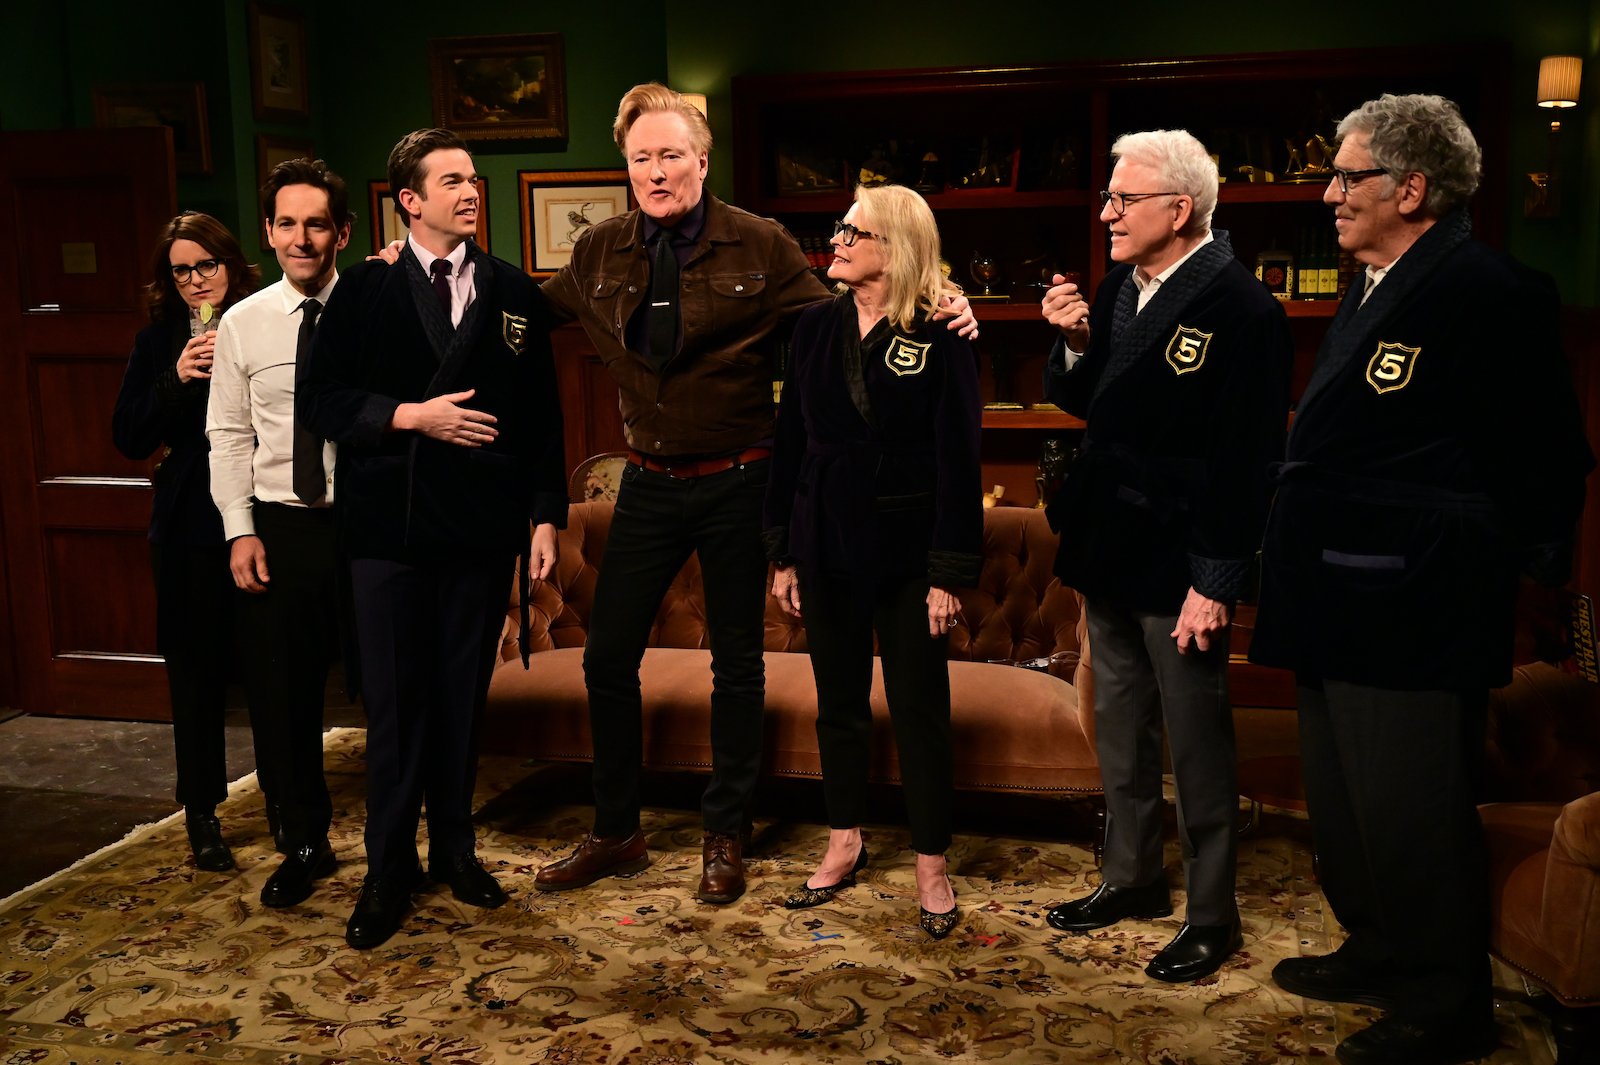 John Mulaney and Conan O’Brien Felt the Need to Apologize to Julian Lennon, The Muppets, and Wheel of Fortune